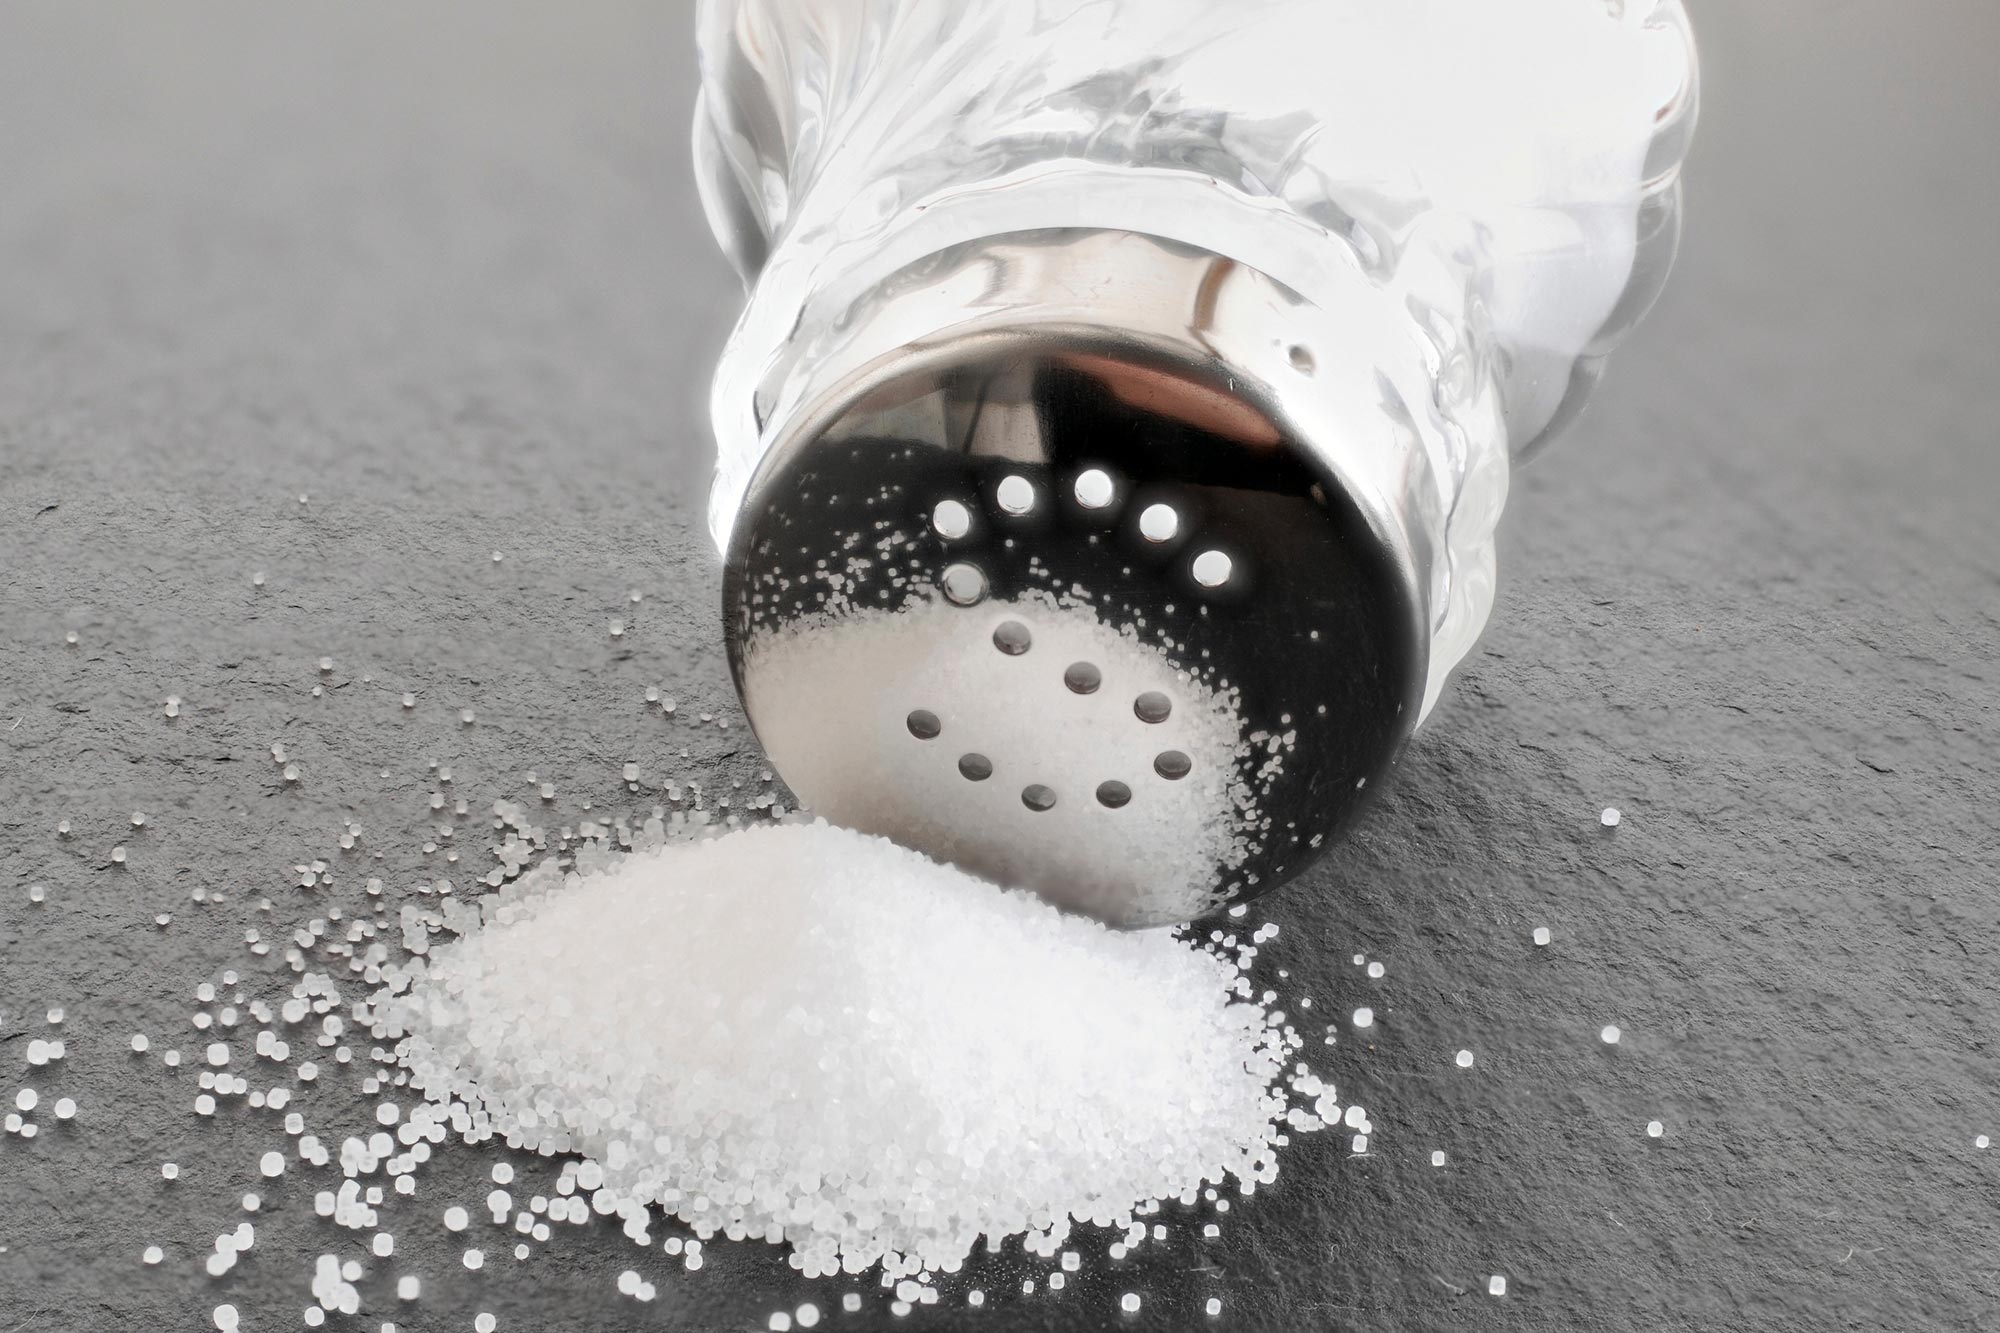 Research Shows Salt Substitutes Lower Risk of Heart Attack/Stroke and Death - SciTechDaily